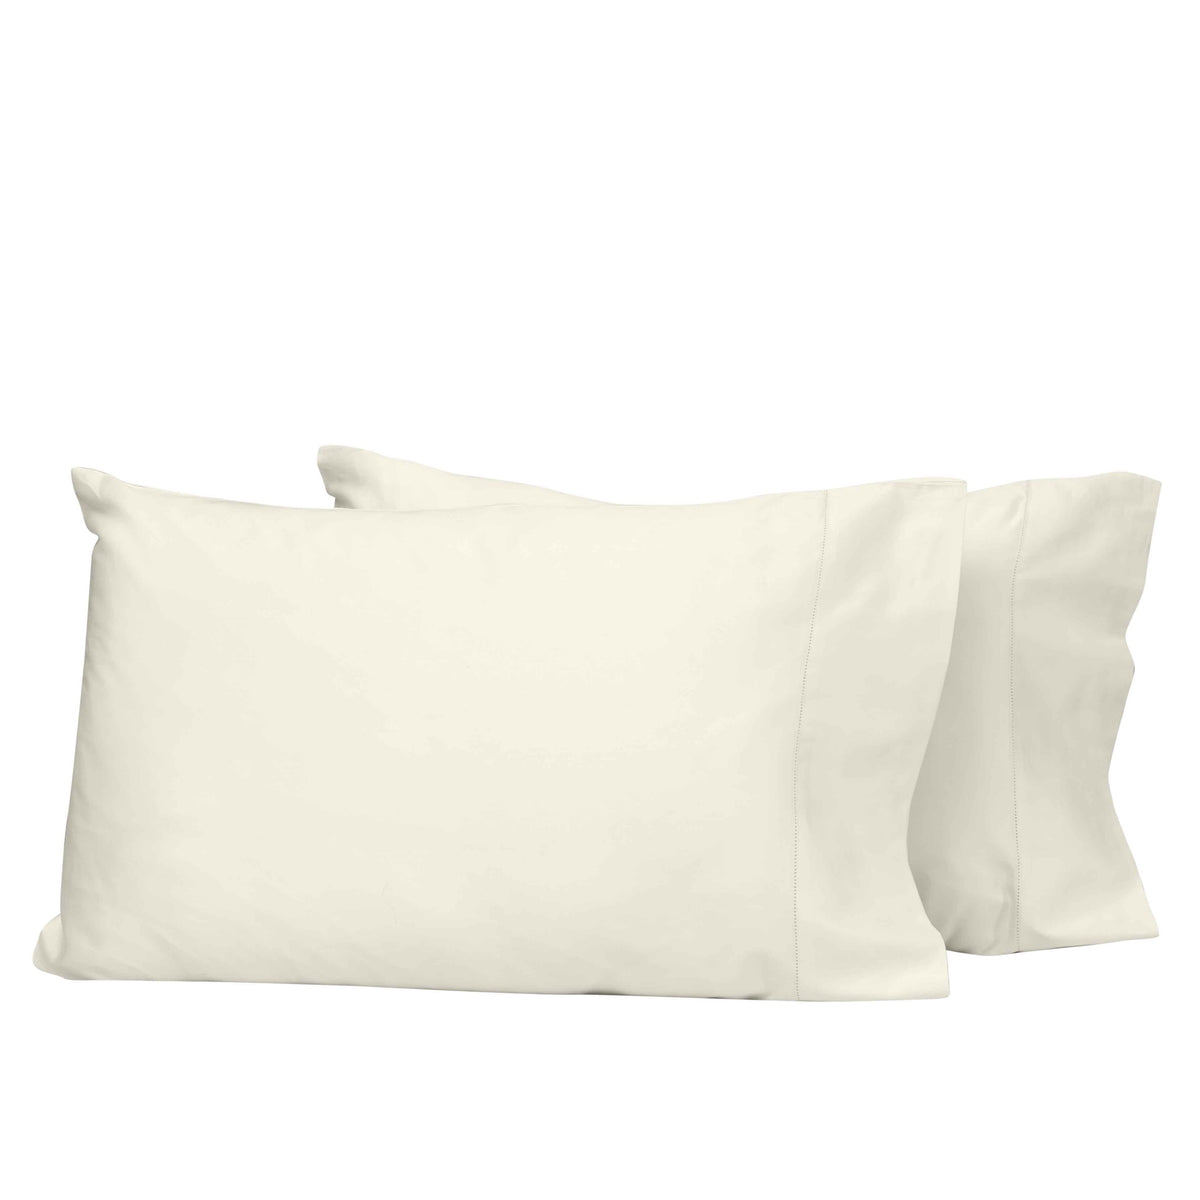 Clear Image of Signoria Tuscan Dreams Pillowcases in Ivory Color